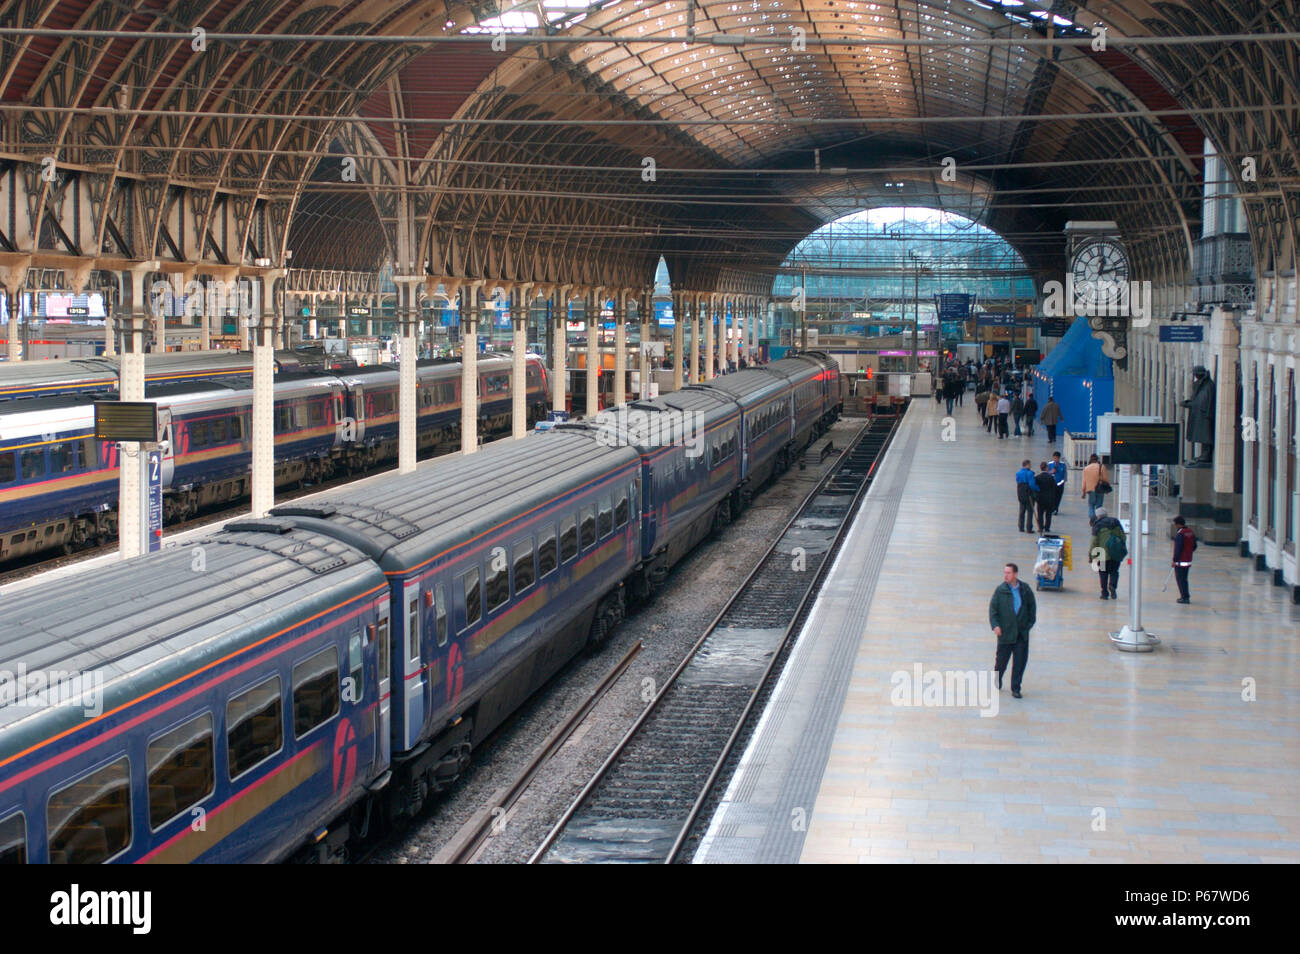 The Great Western Railway. Paddington station. View under trainshed with Great Western service awaiting departure. October 2004. Stock Photo